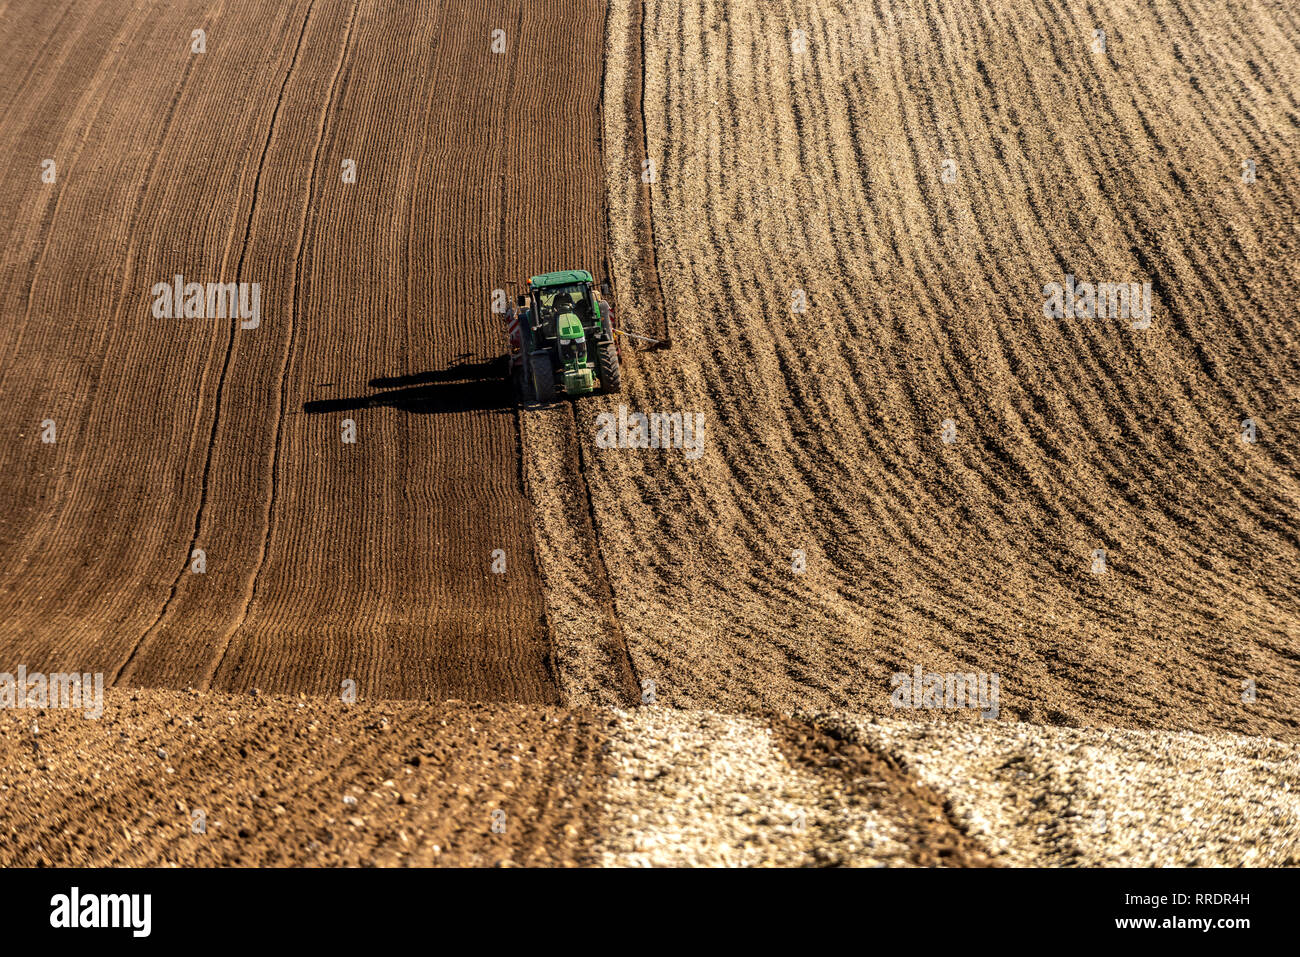 BRIGHTON, ENGLAND - FEBRUARY 25: A farmer preparing his fields for the spring at Falmer, near Brighton, England. (Photo by Andrew Hasson/Getty Images) Stock Photo